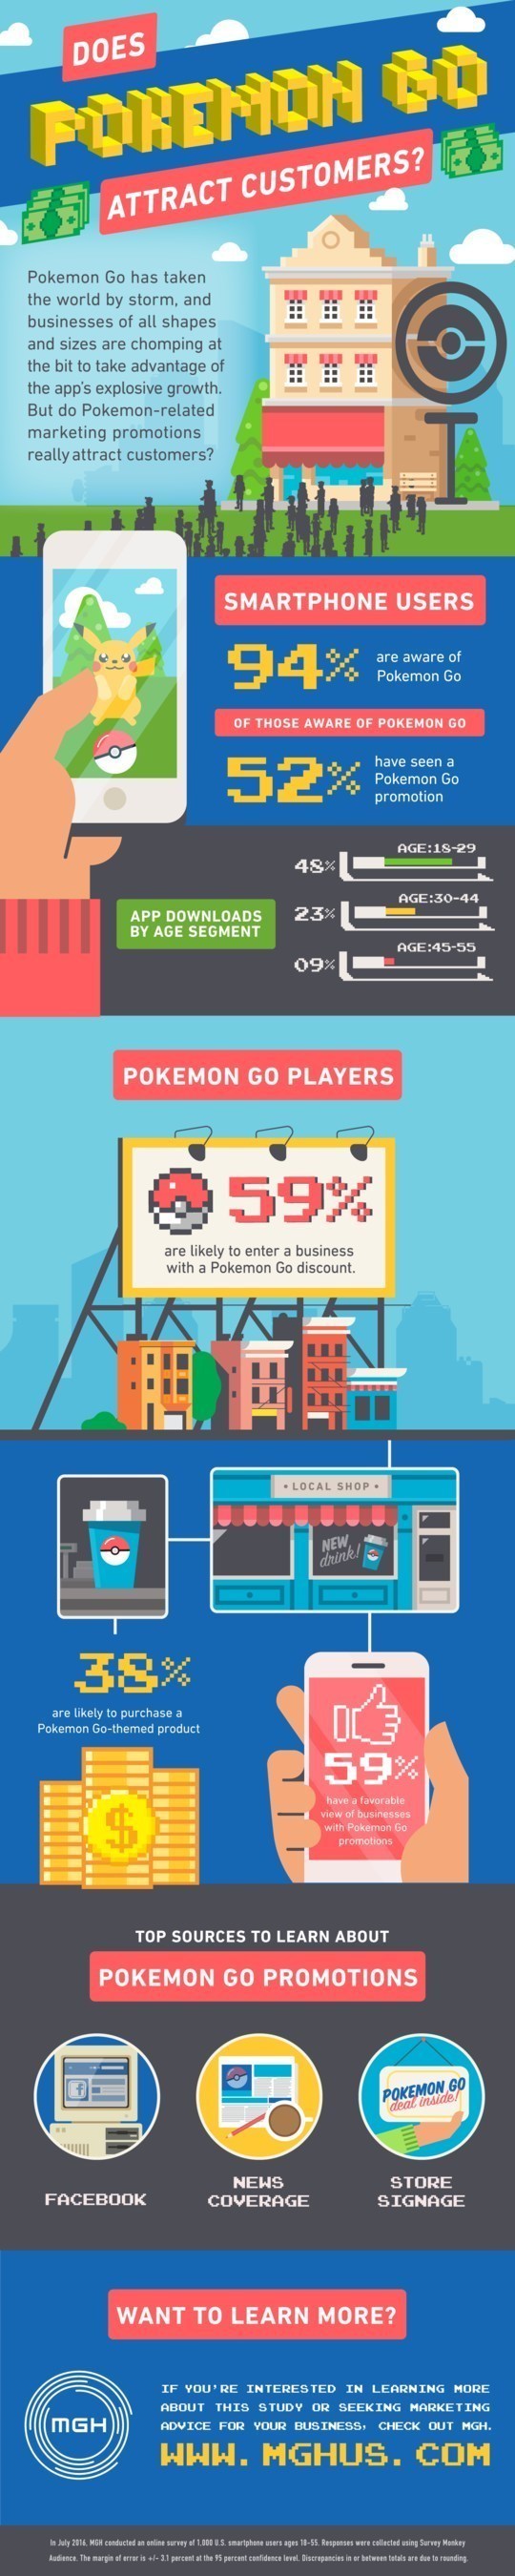 Infographic displays results from a survey conducted last month of smartphone users to uncover if businesses hosting Pokemon Go promotions attracted customers.